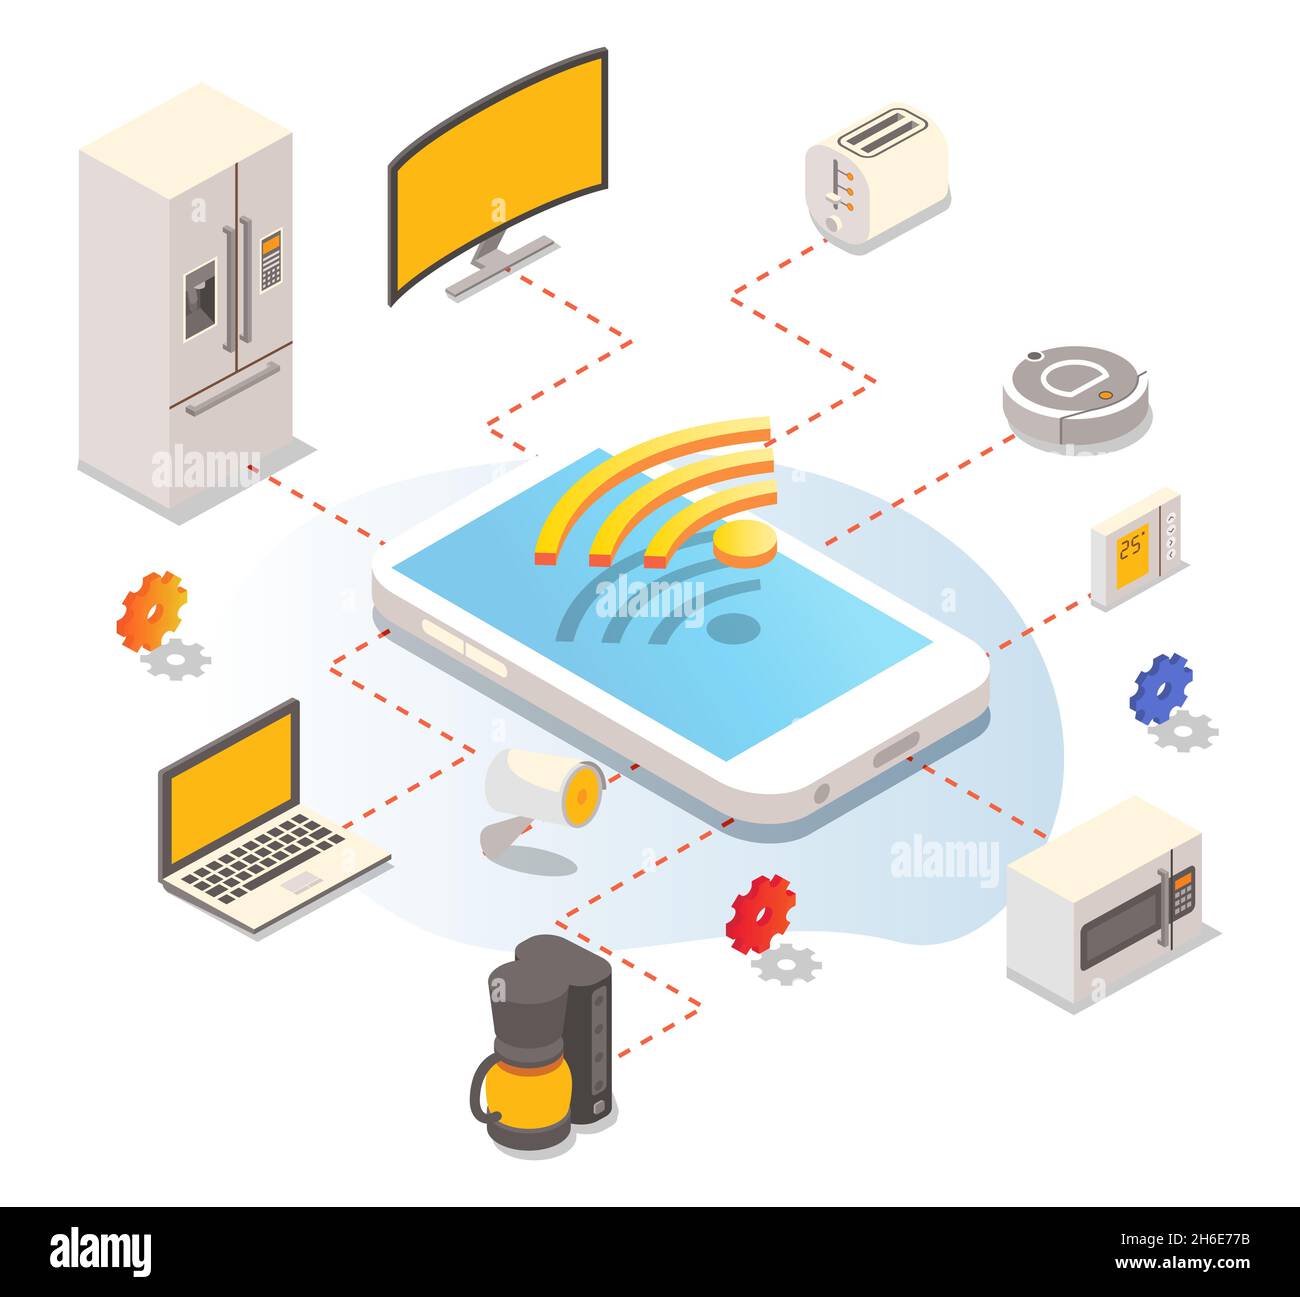 Internet of things, iot, automated home. Smart household appliances and devices controlled by mobile phone, vector. Stock Vector